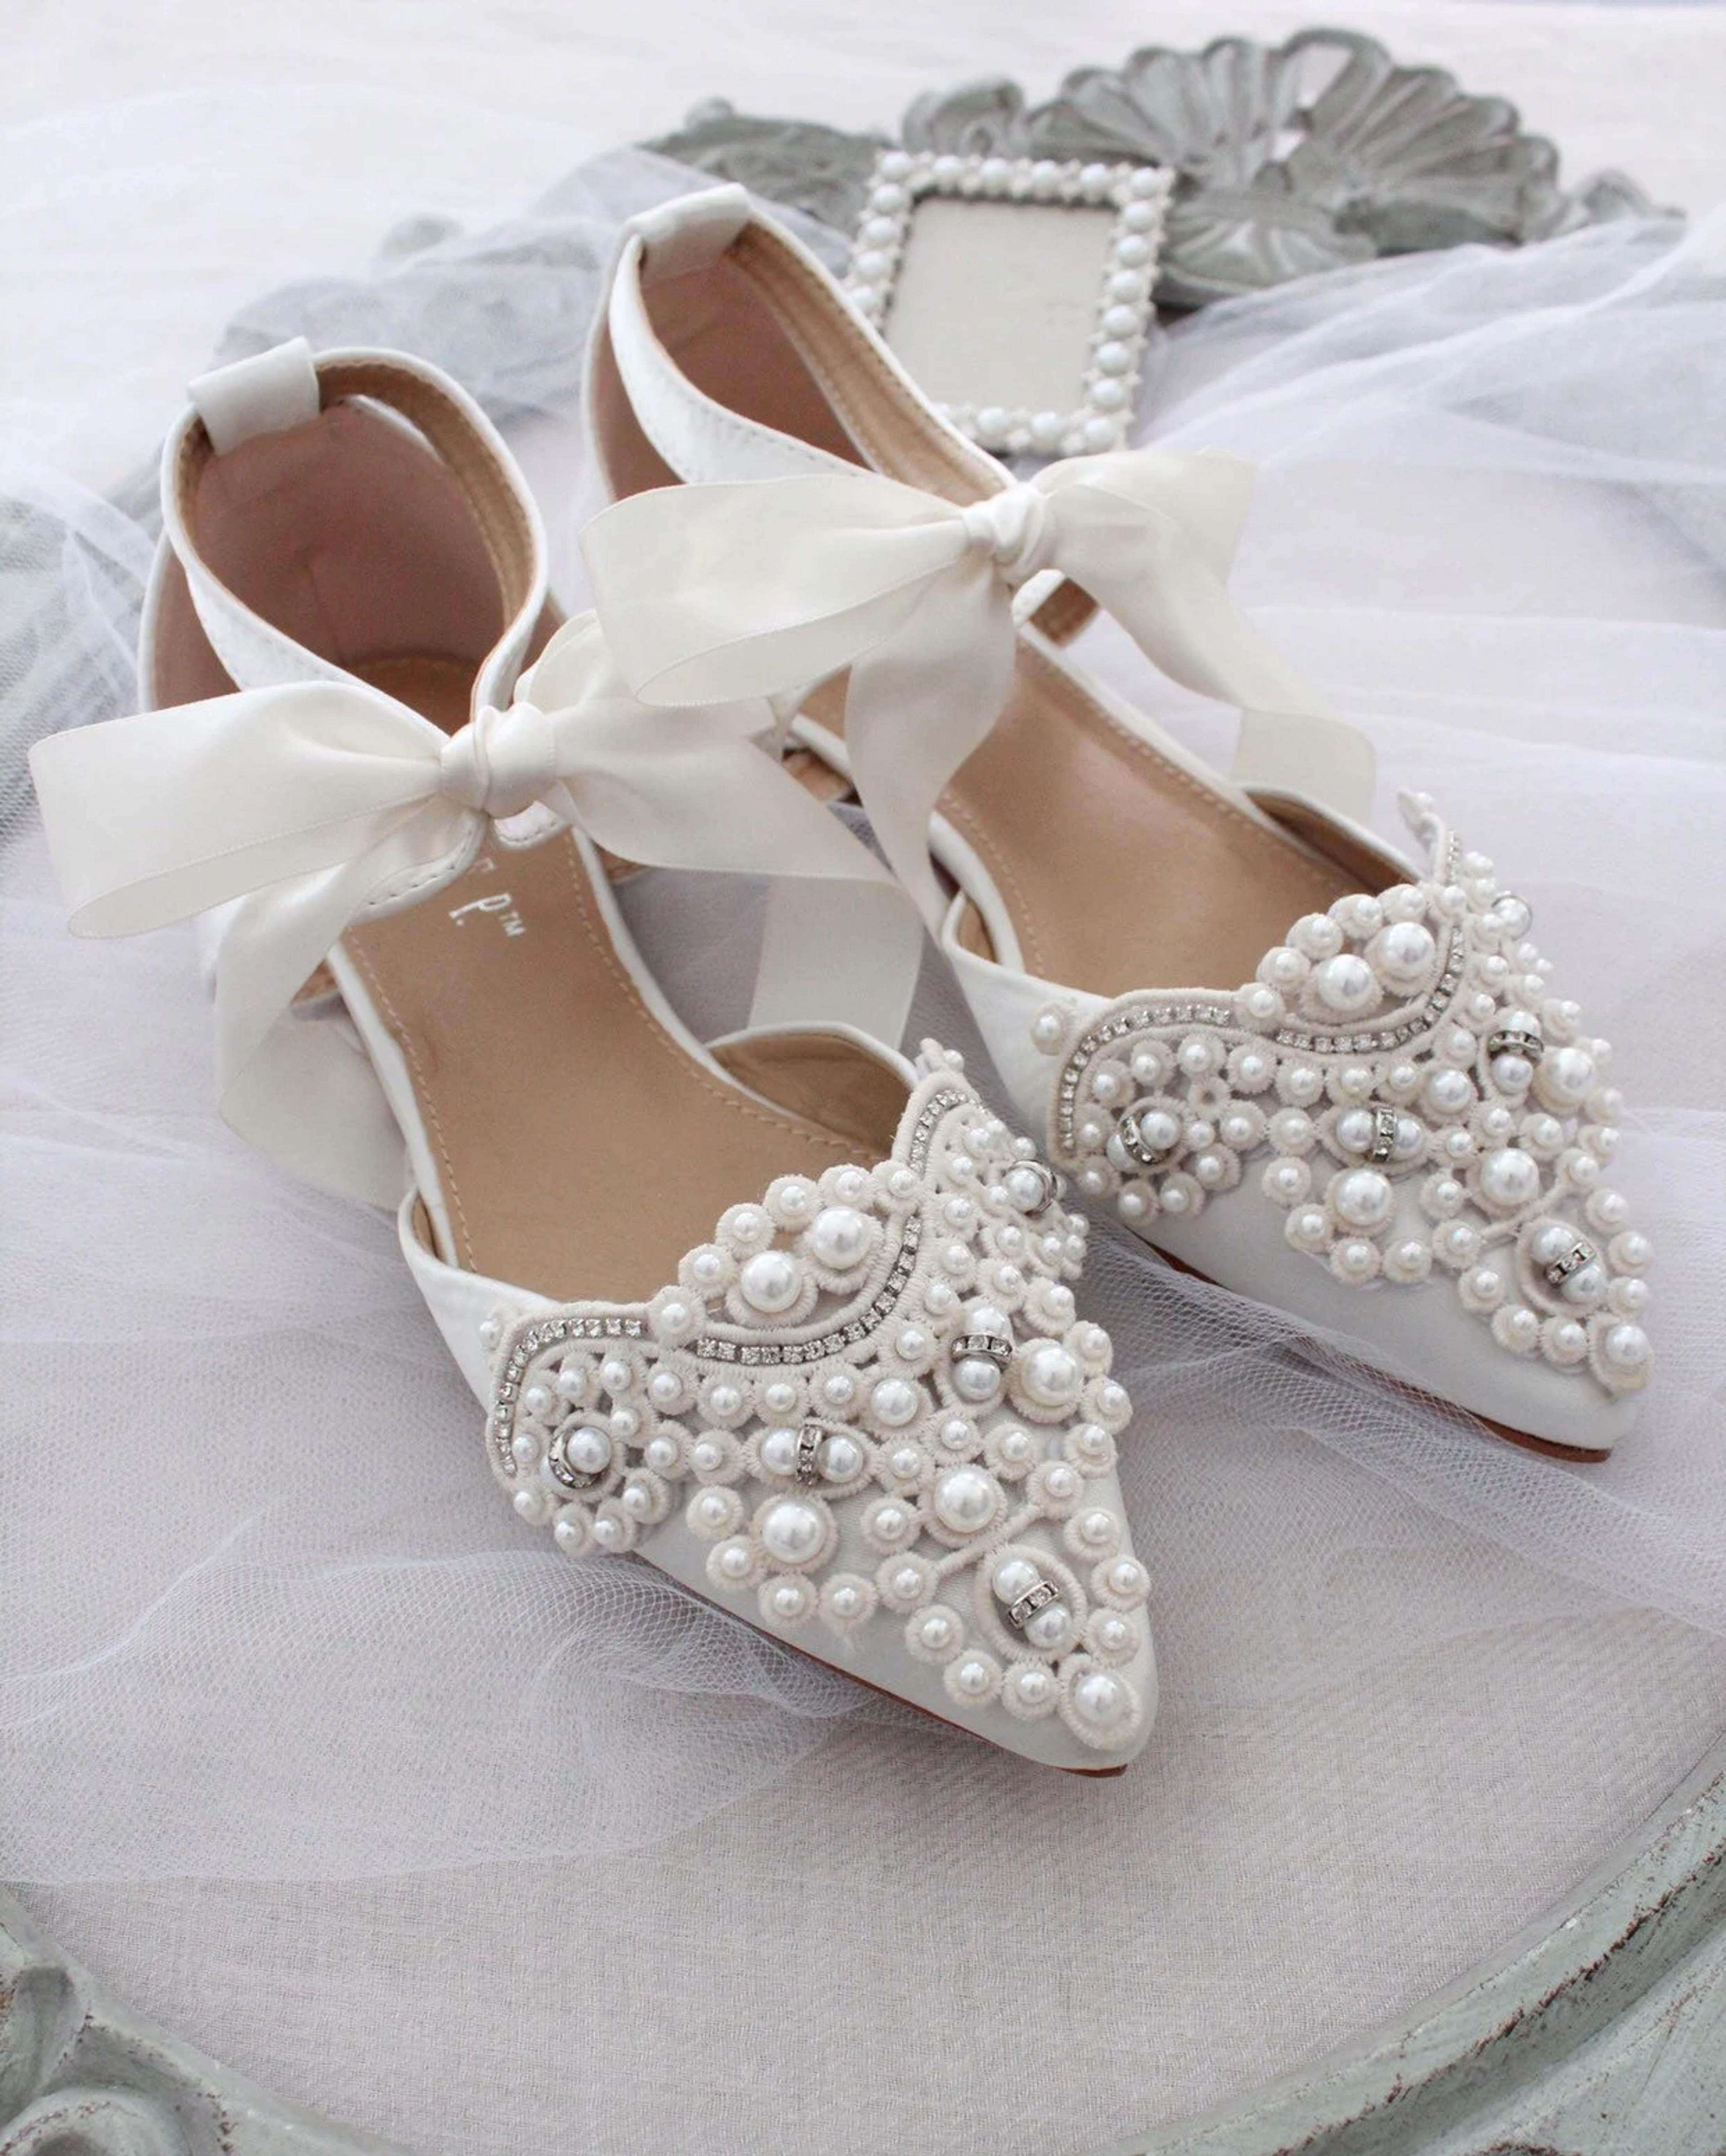 Ivory Satin Pointy Toe Flats with OVERSIZED PEARLS APPLIQUE, Women Wedding Shoes, Ivory Bridal Flats, Ivory Bridal Shoes, Wedding Flats